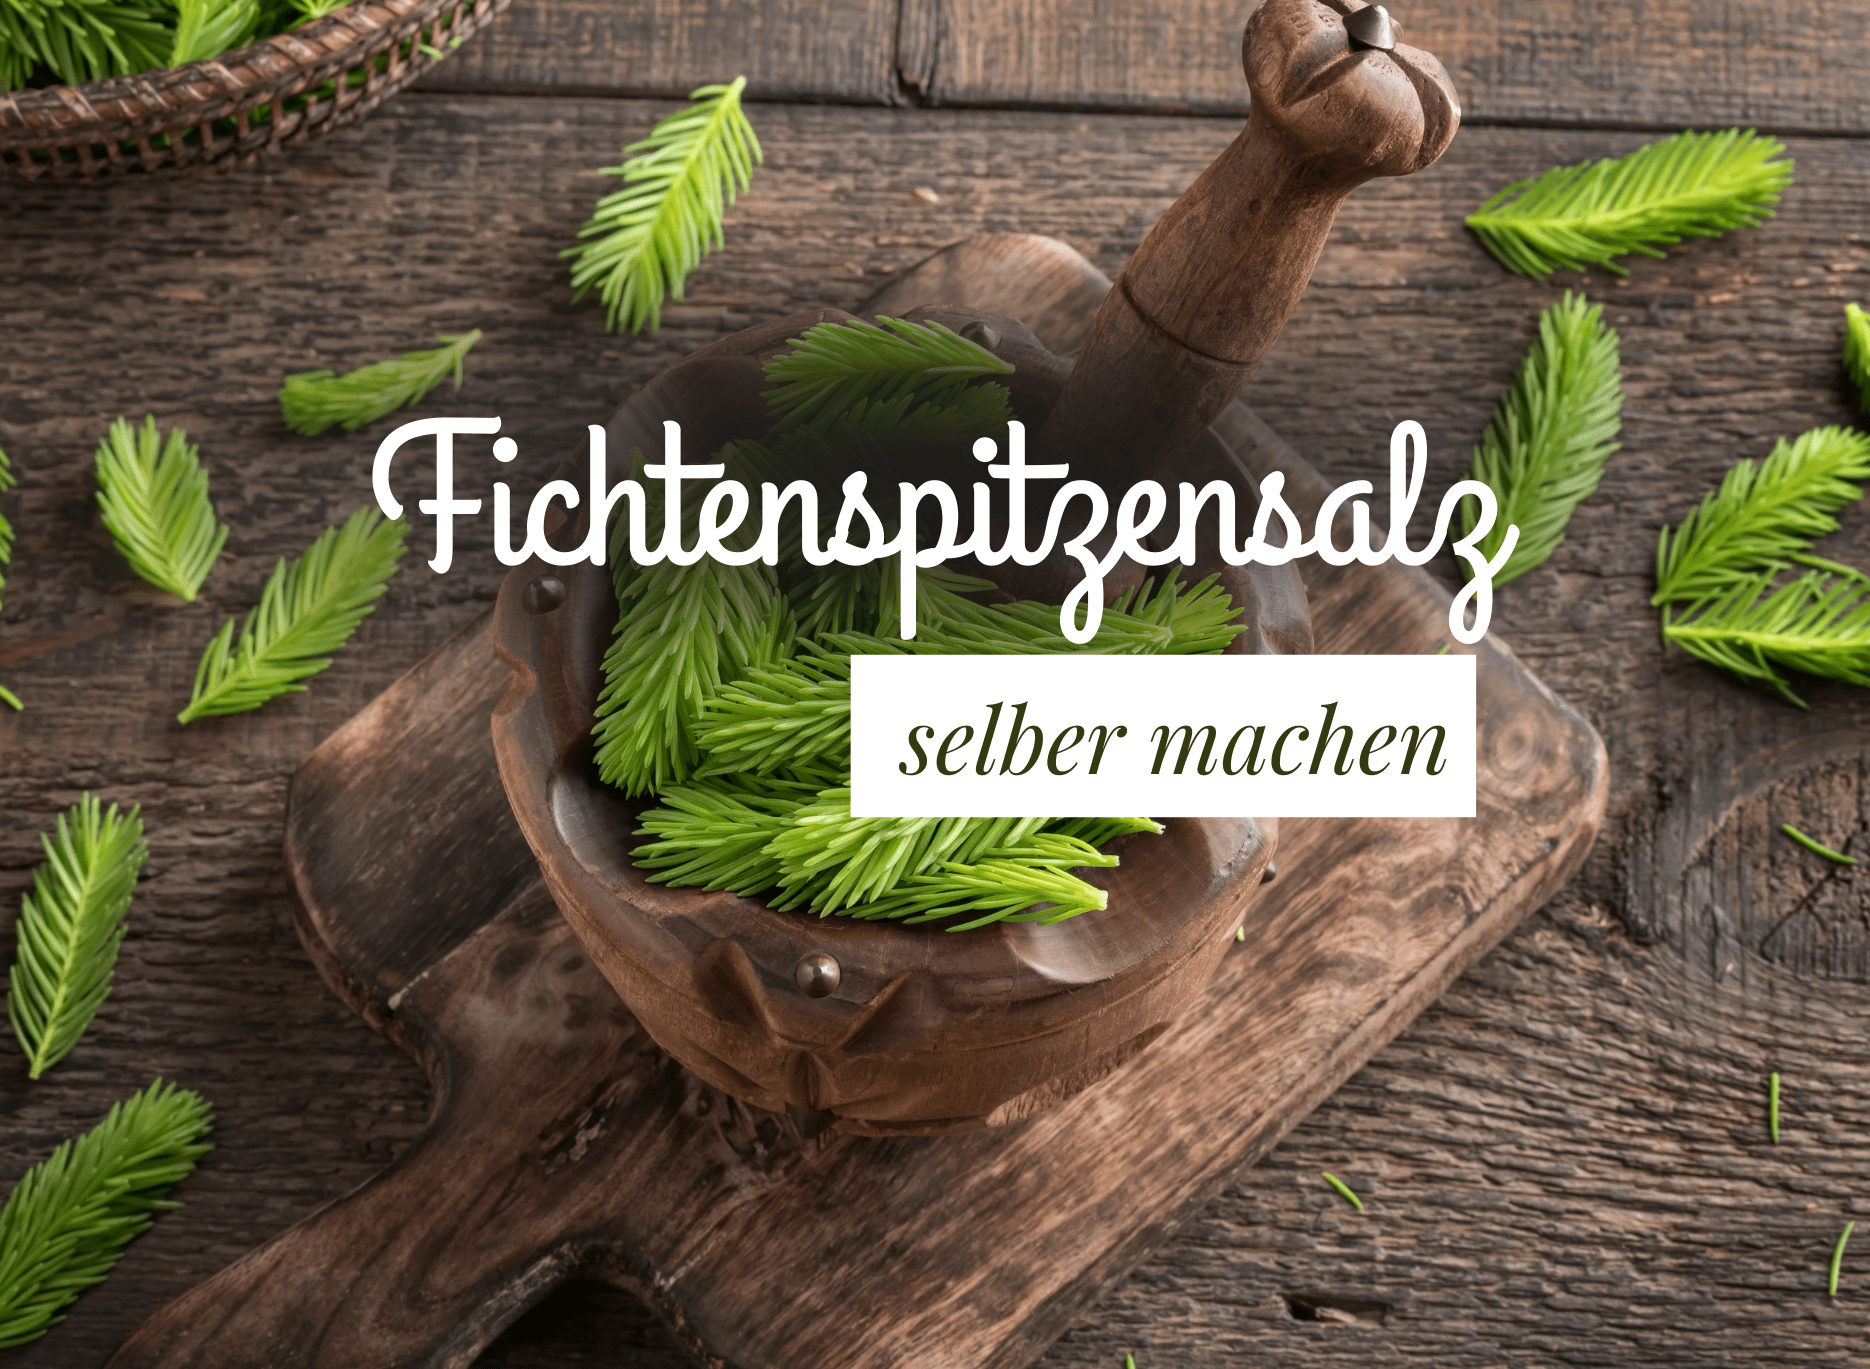 You are currently viewing Fichtensalz selber machen